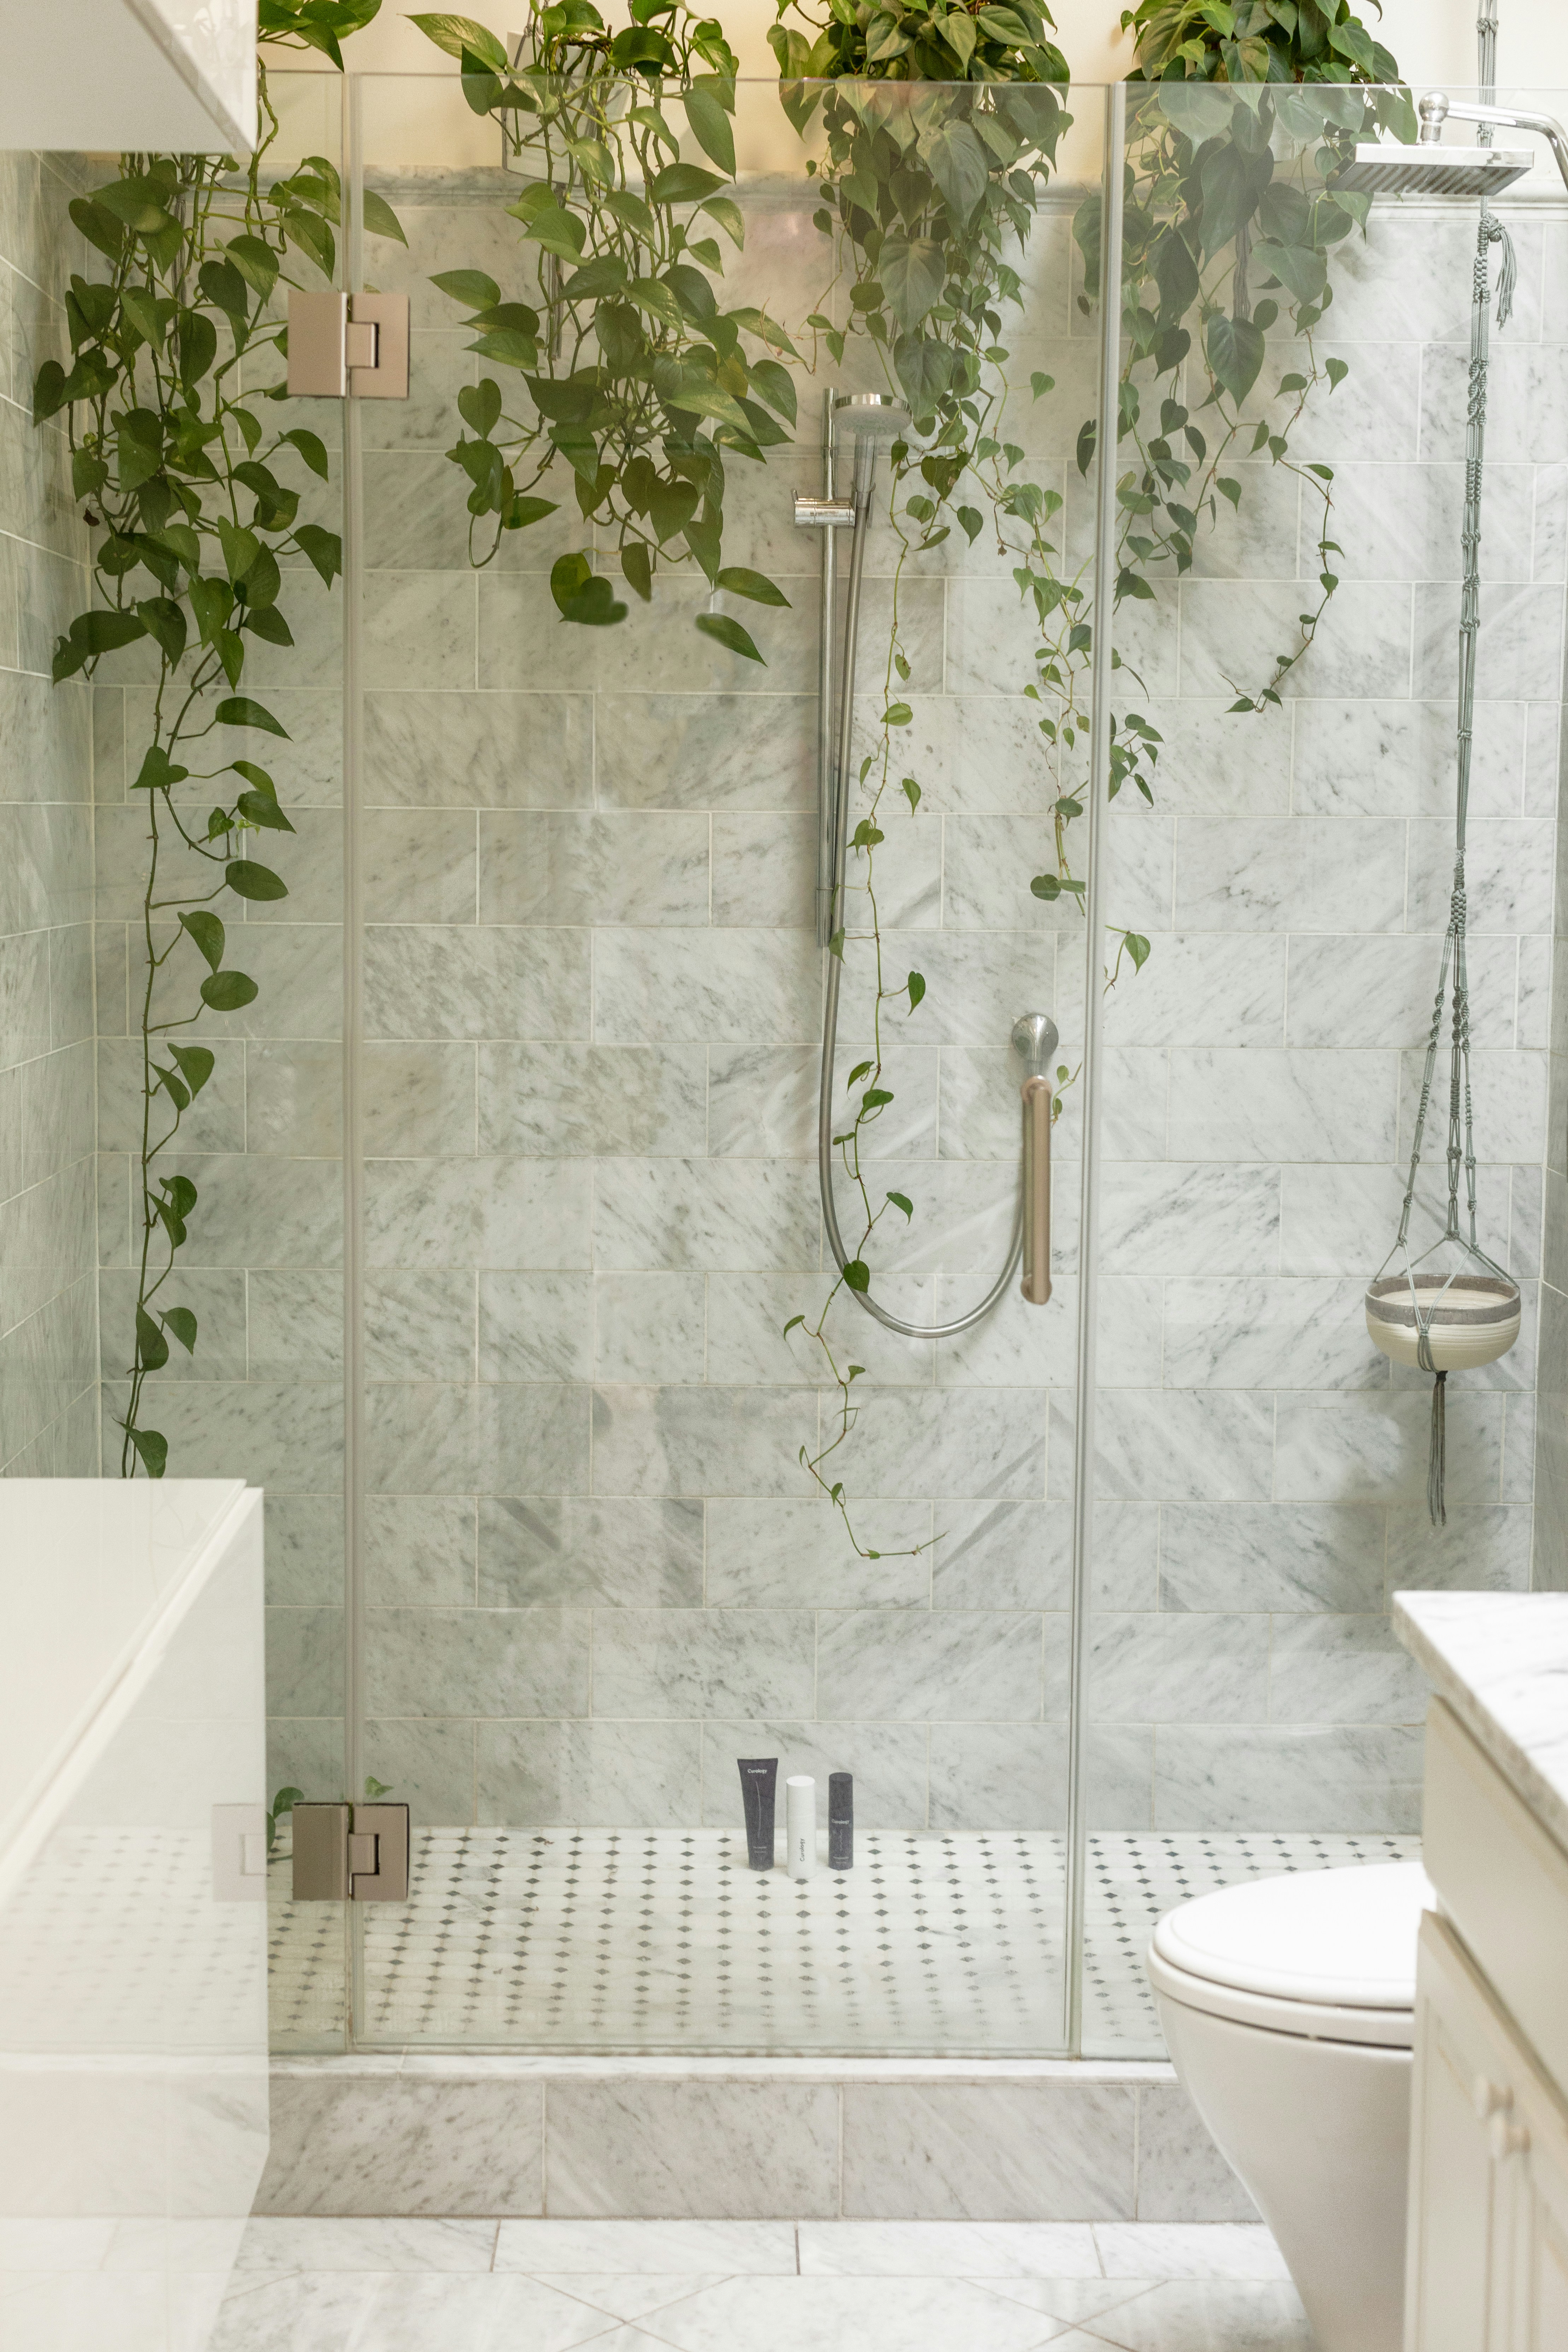 Hanging plants in a shower.